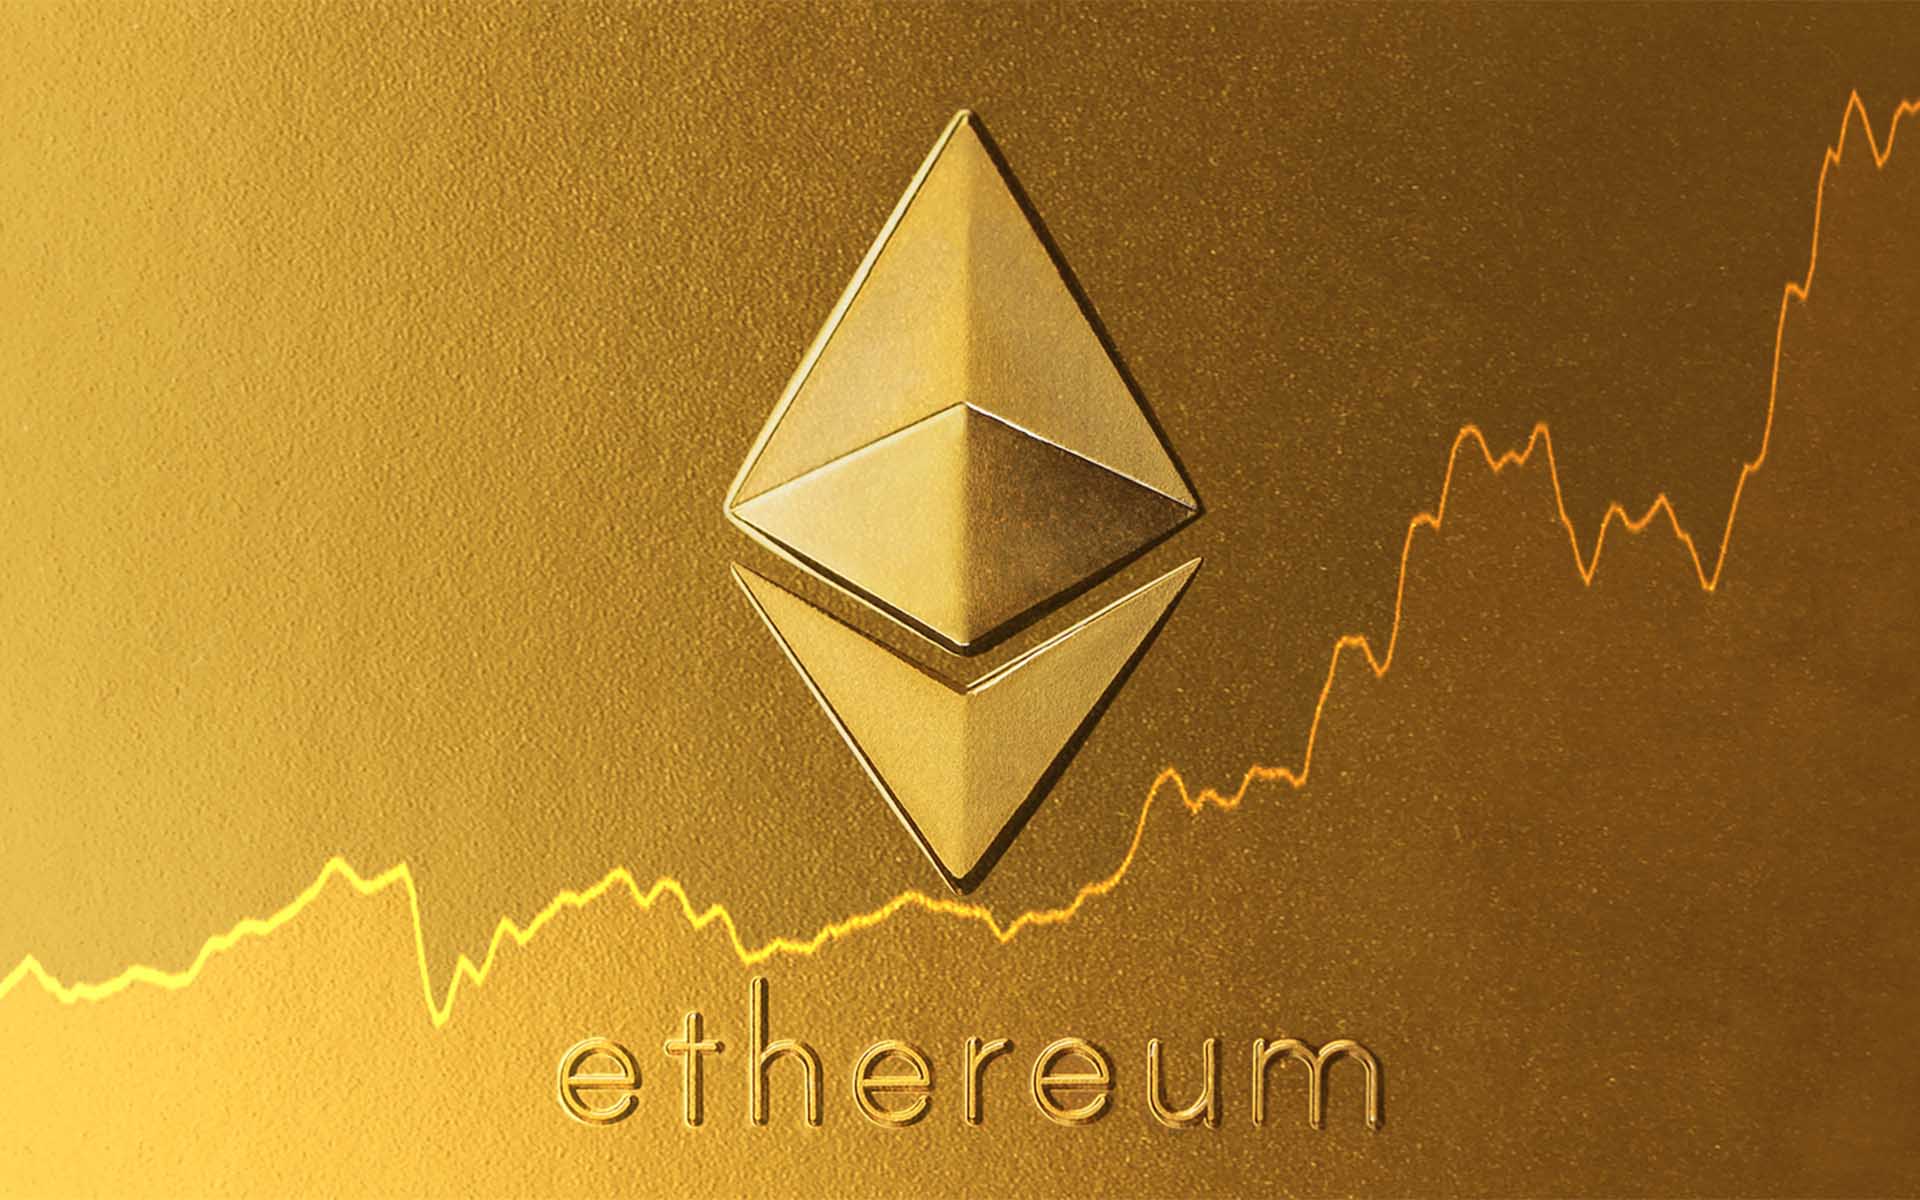 This is Expected to get Ethereum Over $1000 at the End of 2019